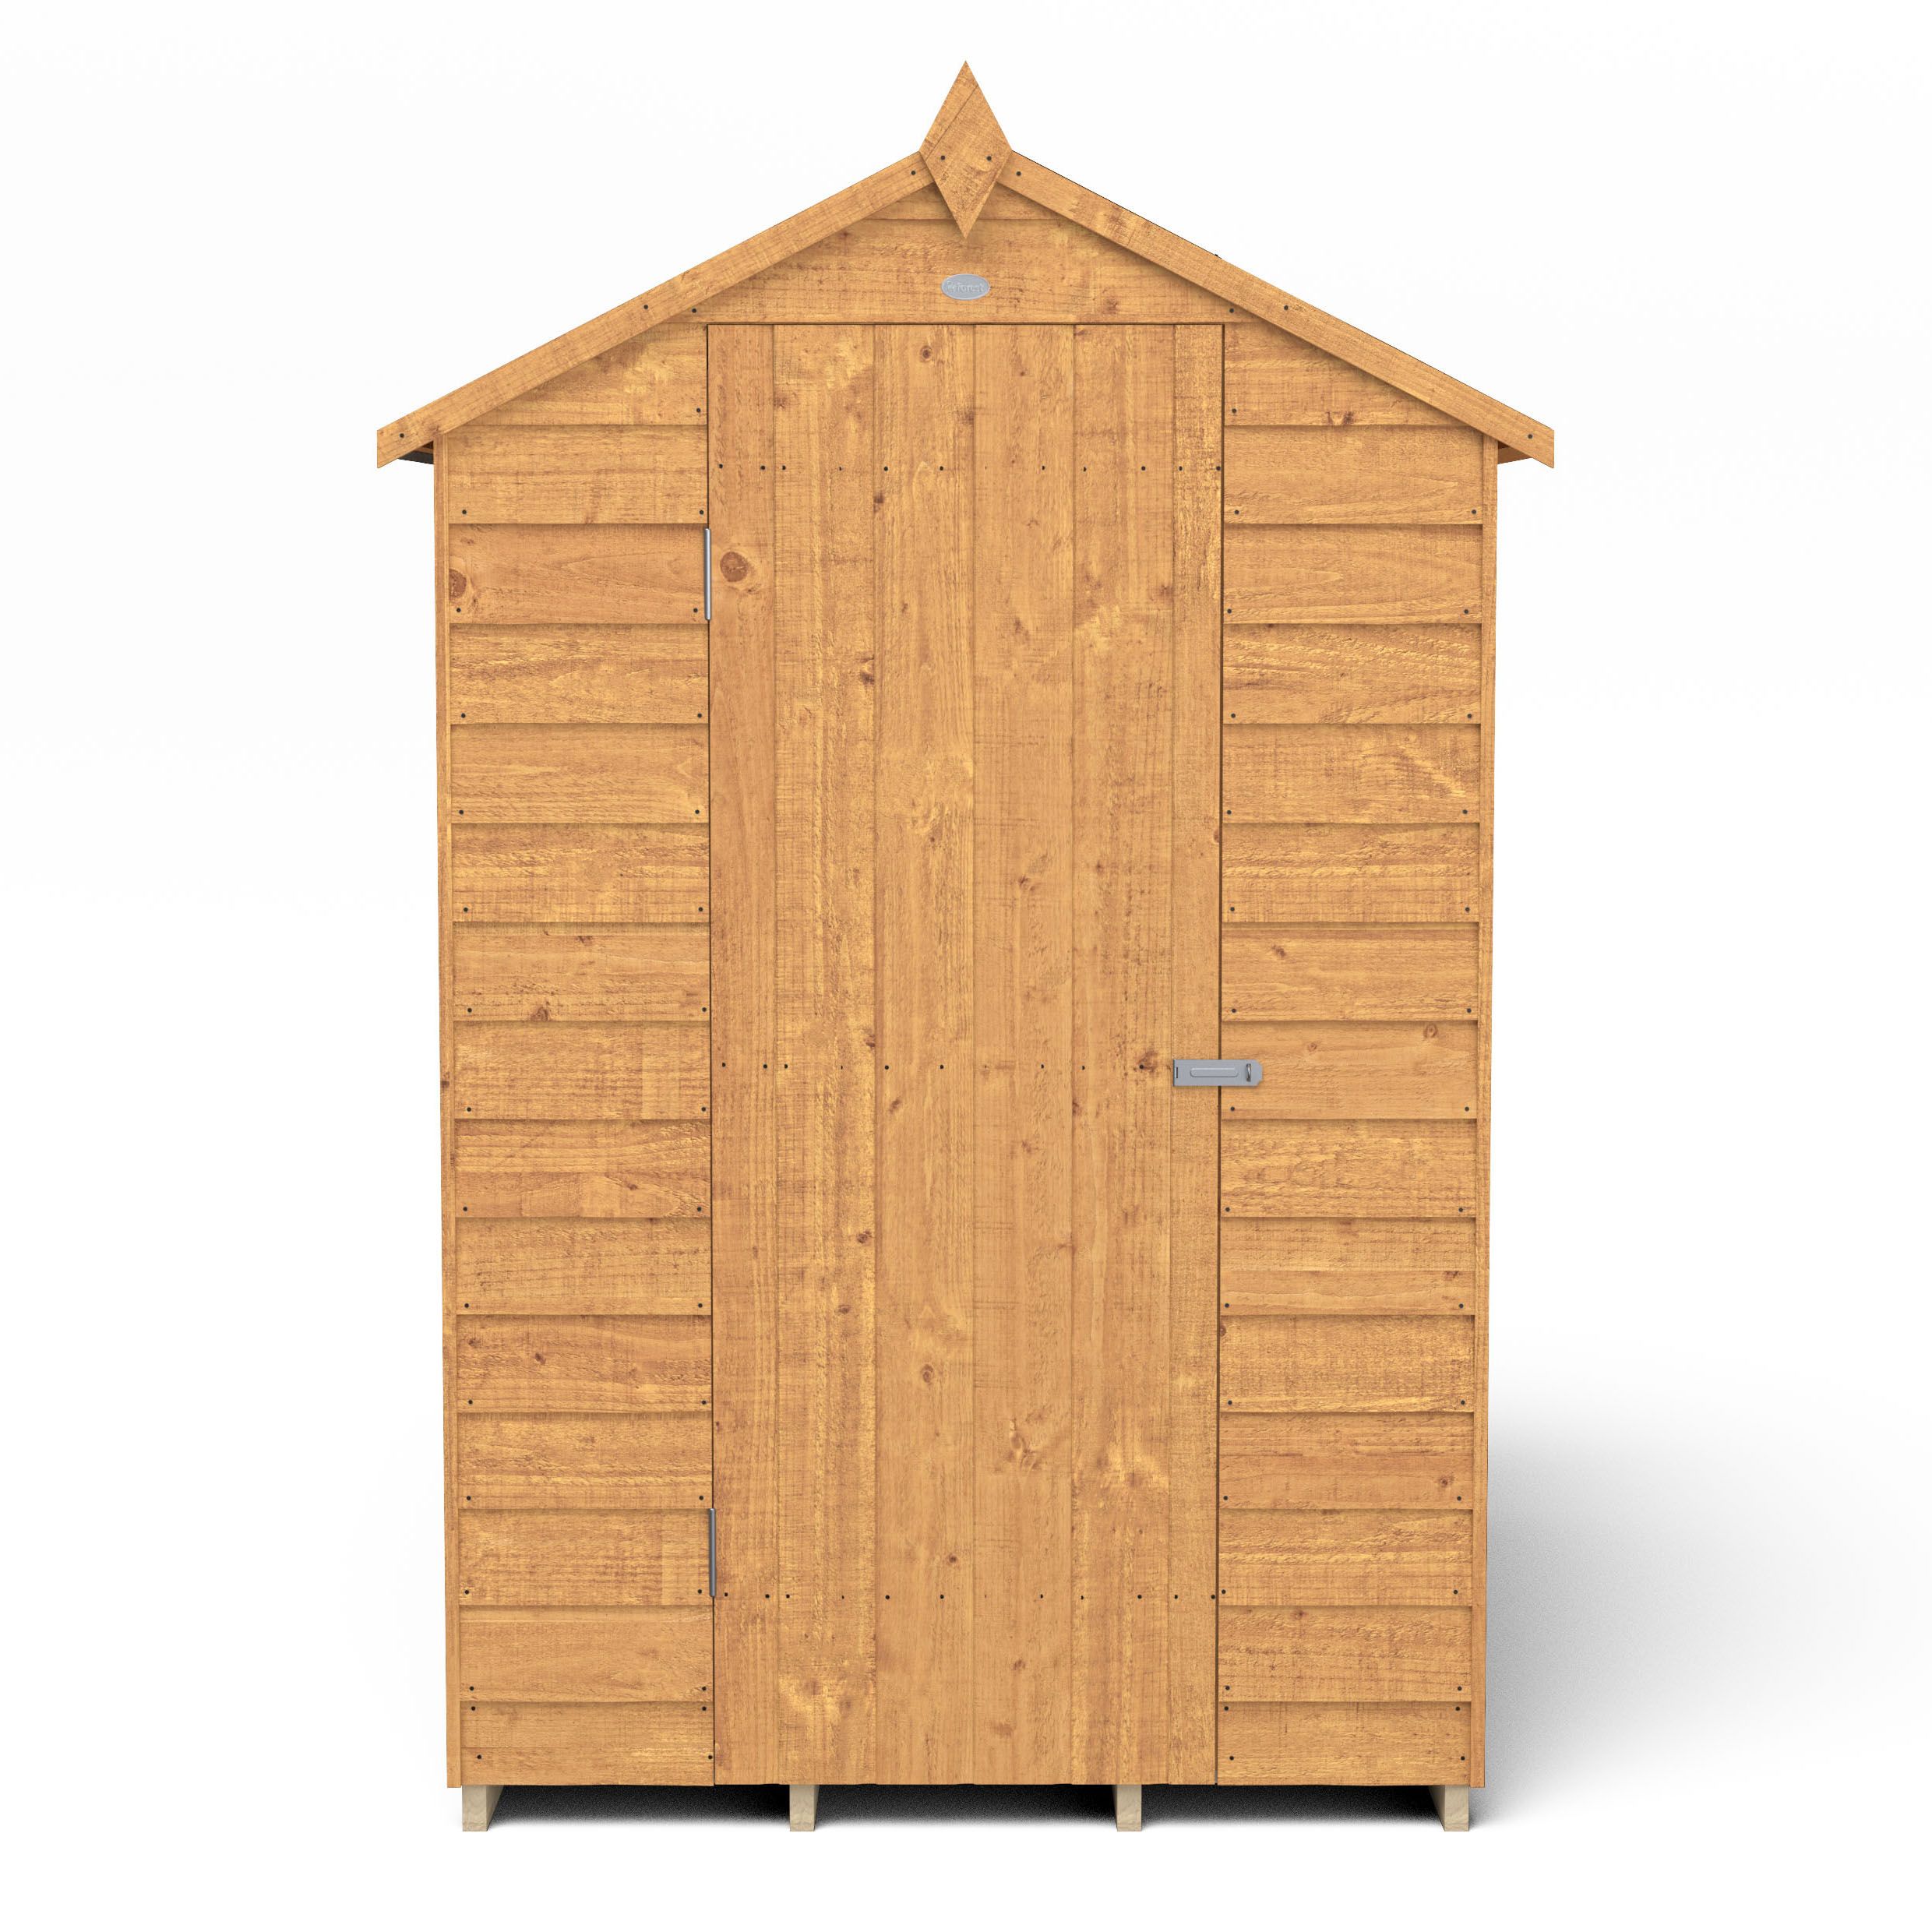 Forest Garden Overlap 6x4 ft Apex Wooden Dip treated Shed with floor - Assembly service included